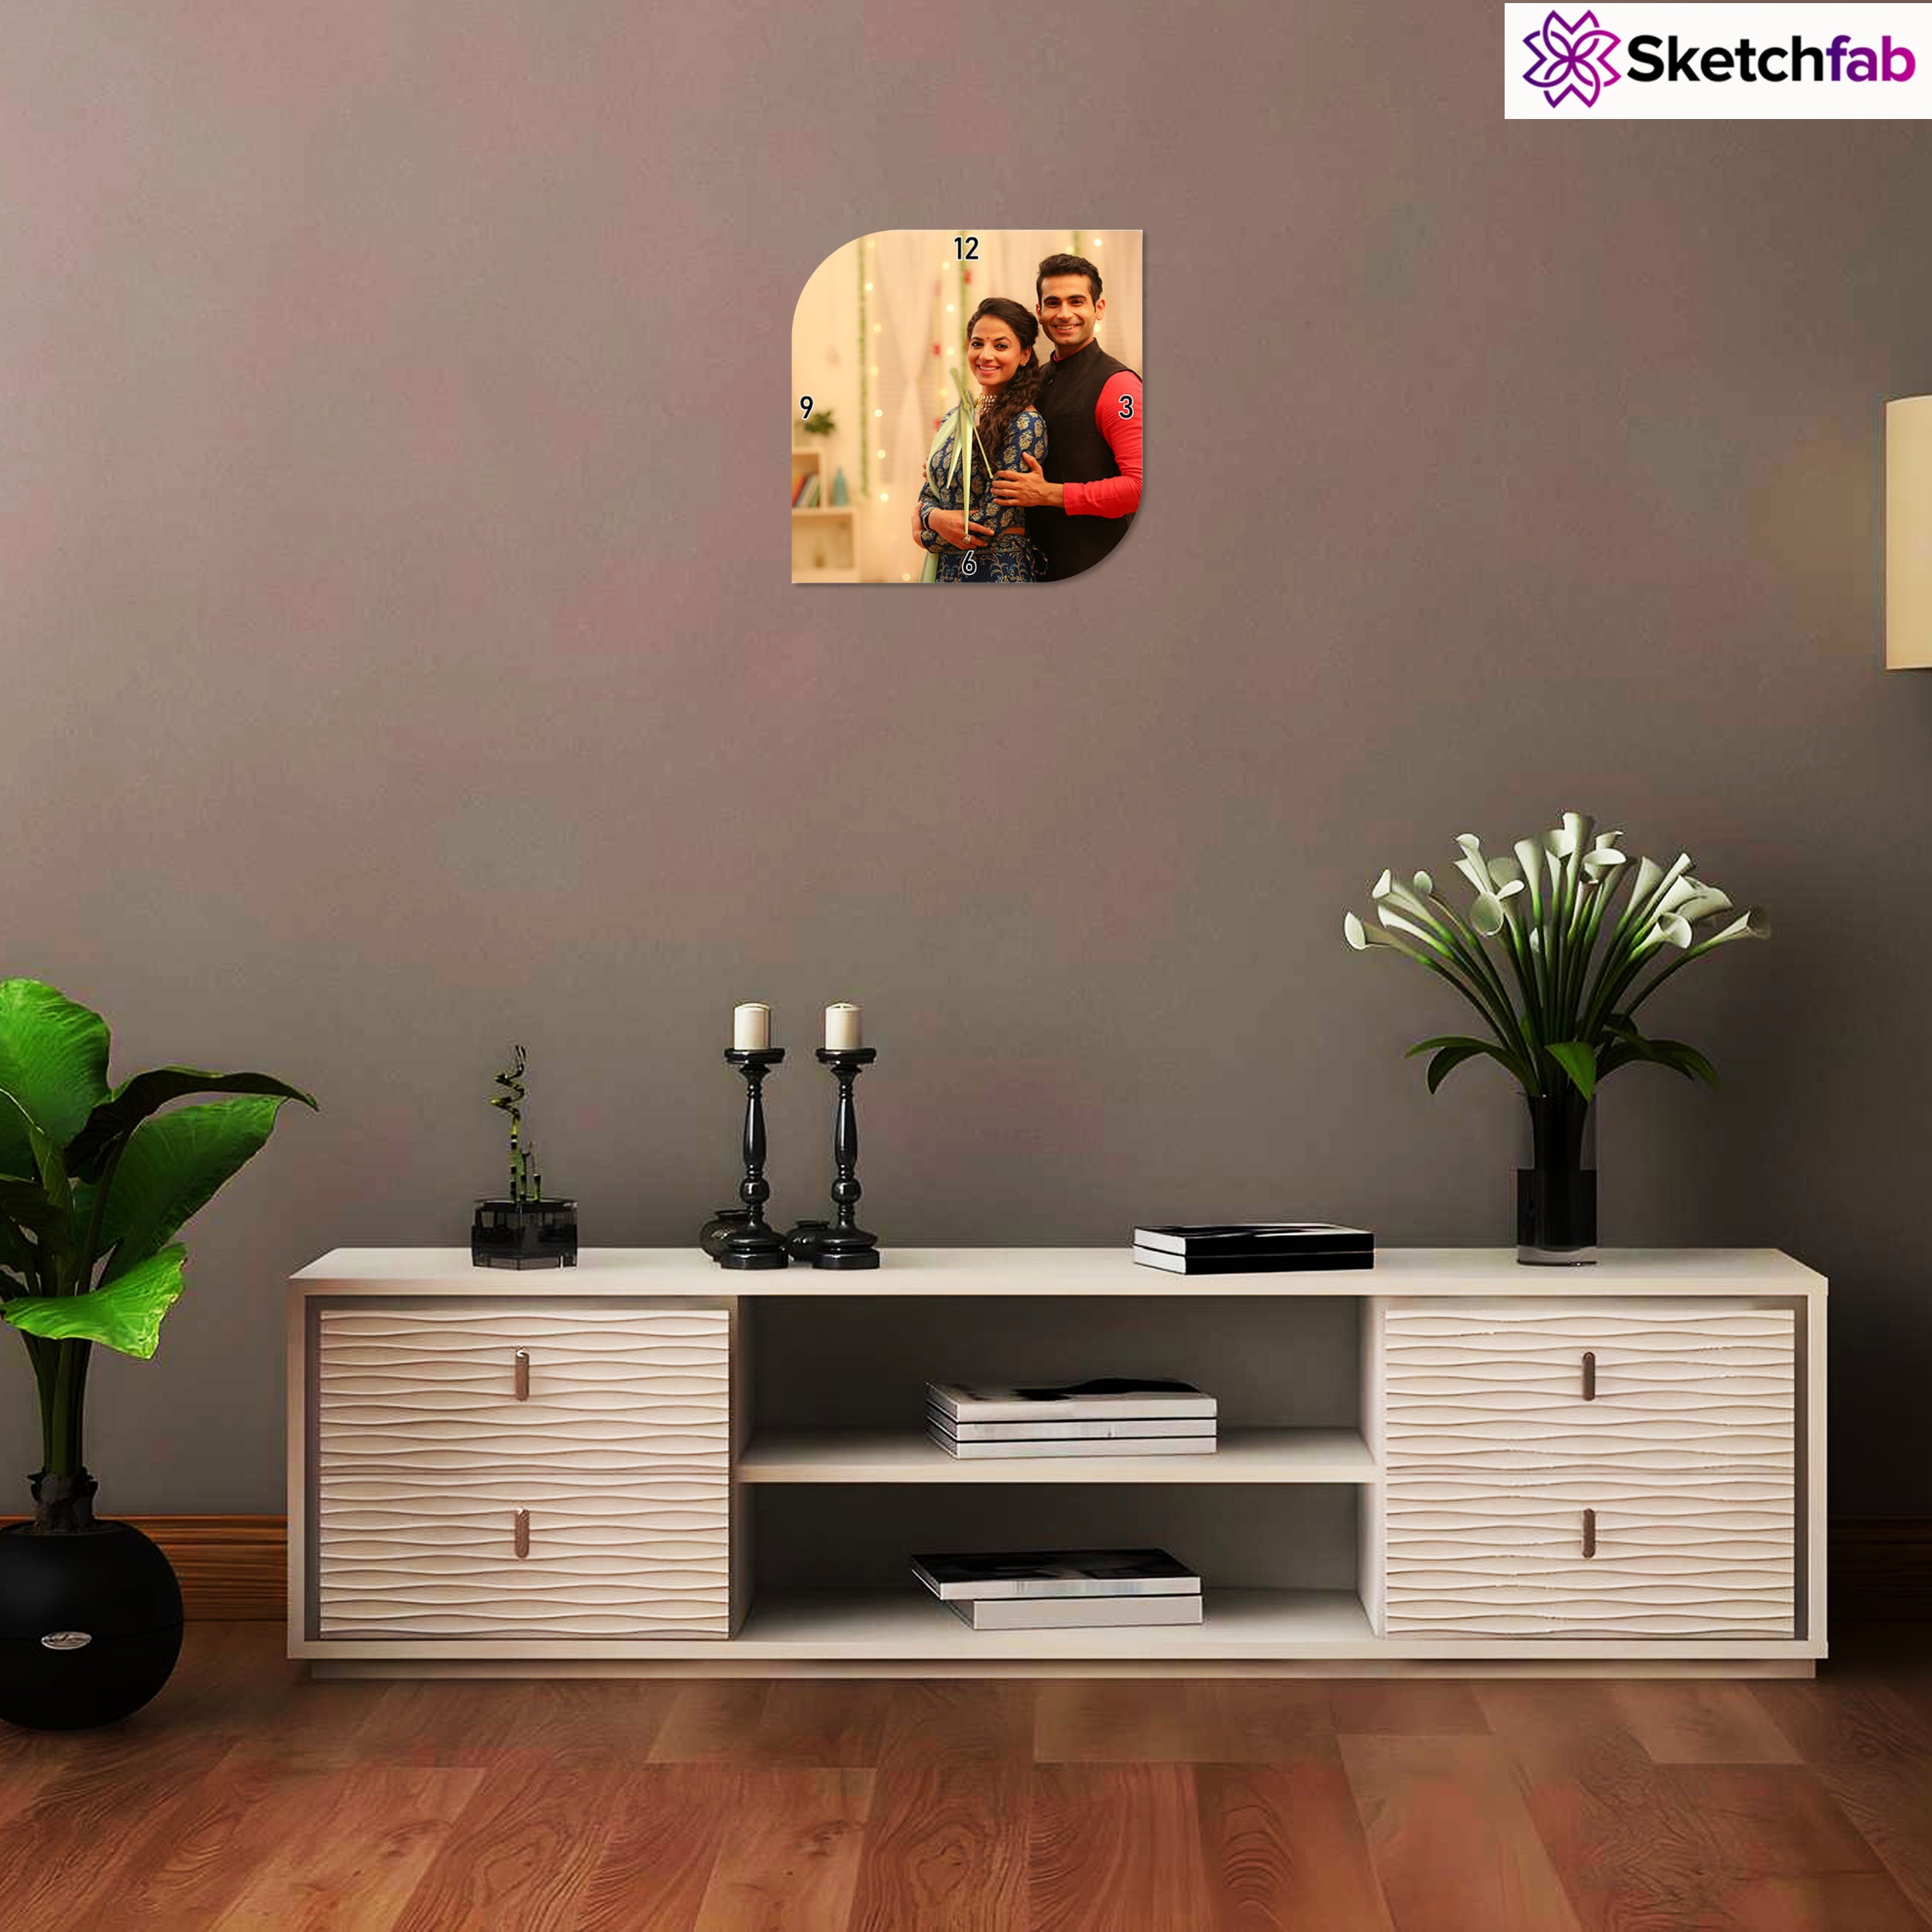 Personalized Wall Clocks with Personalized Photo Text Logo for Kitchen Bathroom Home Wedding Friends Family Lover